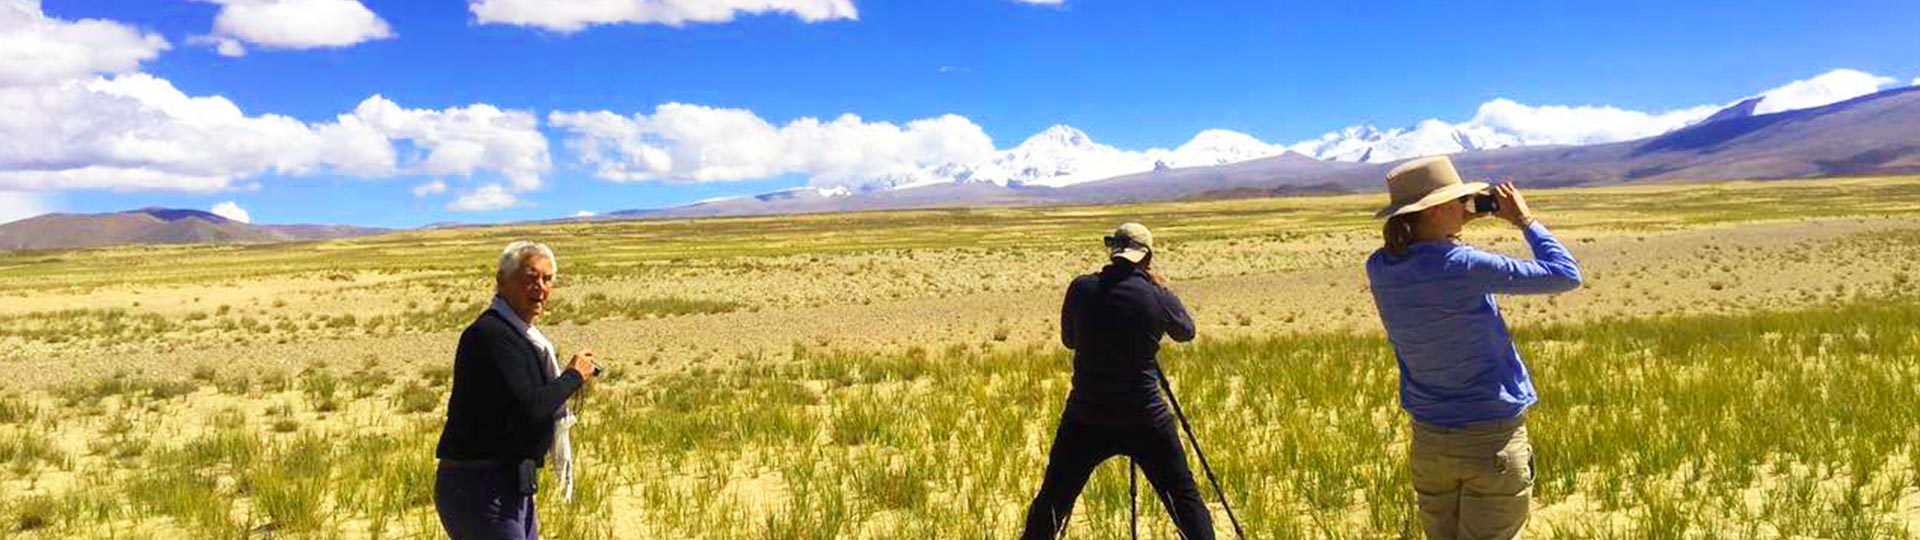 9 Days Lhasa to EBC Photography Expedition